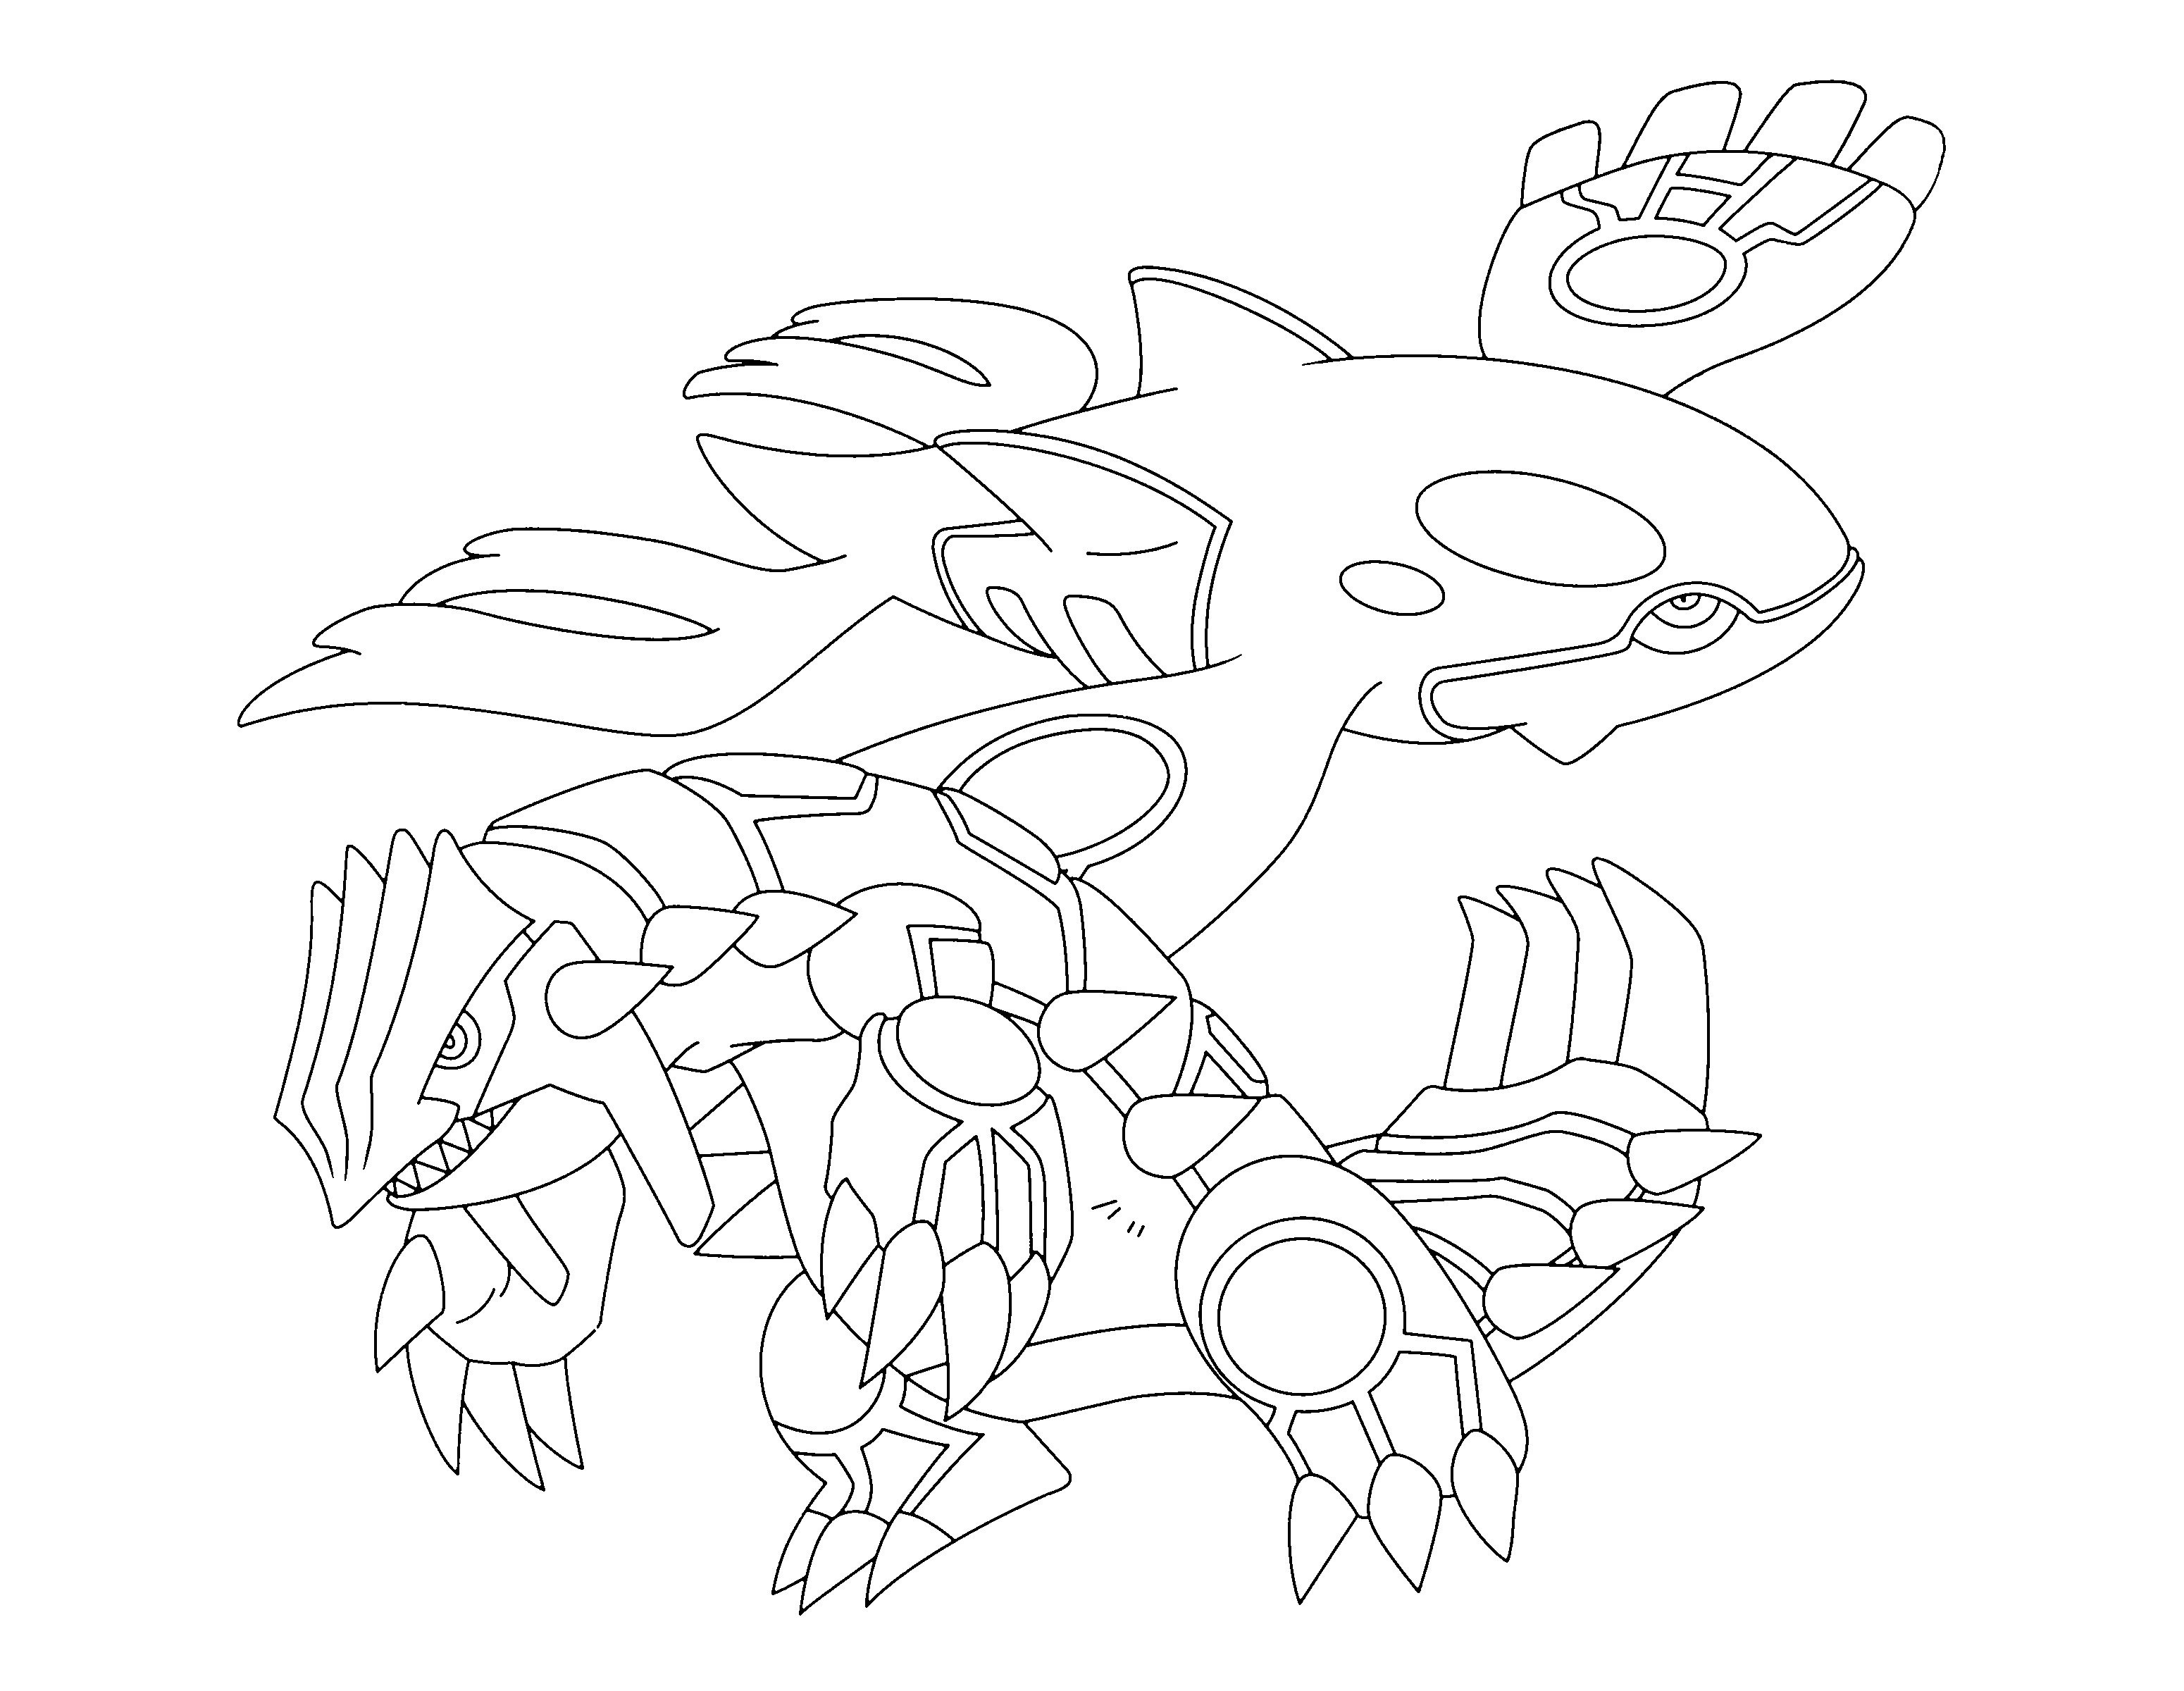 Kyogre Coloring Page.